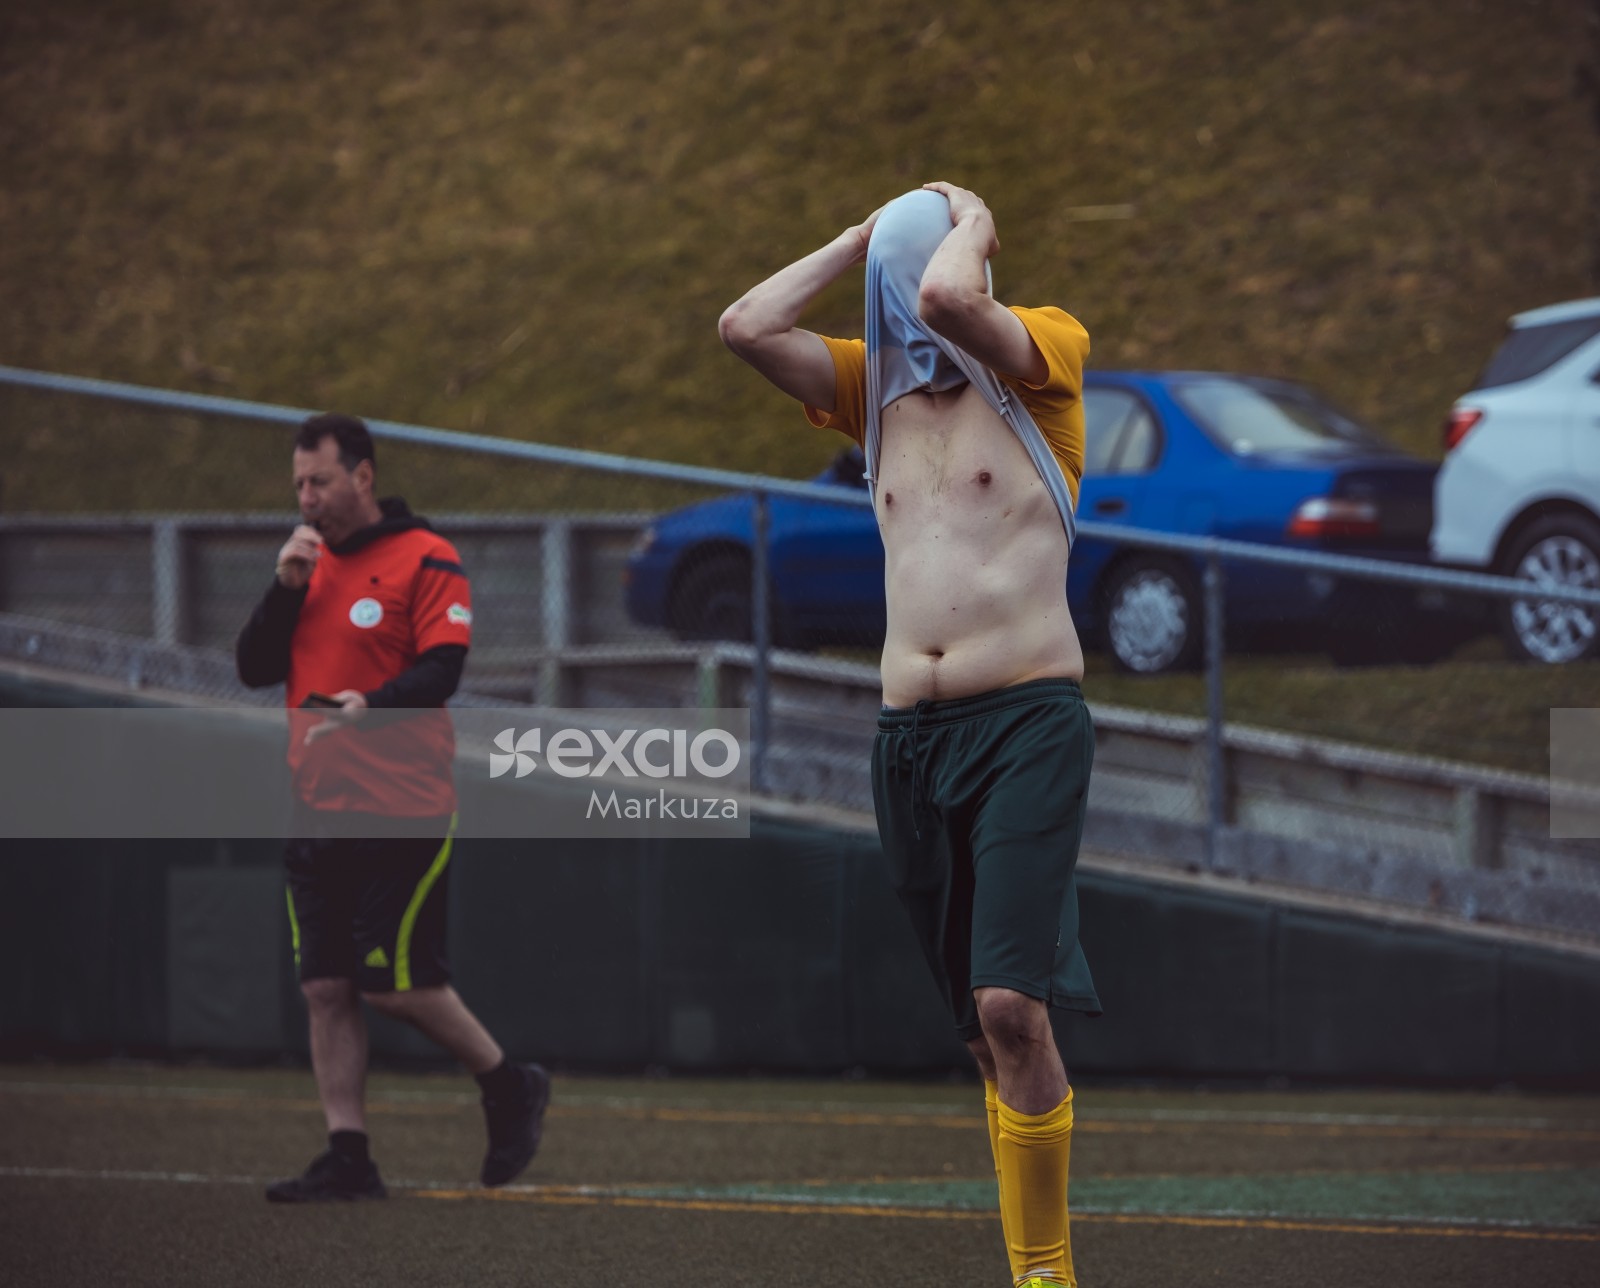 Player covering face with shirt bare belly - Sports Zone sunday league